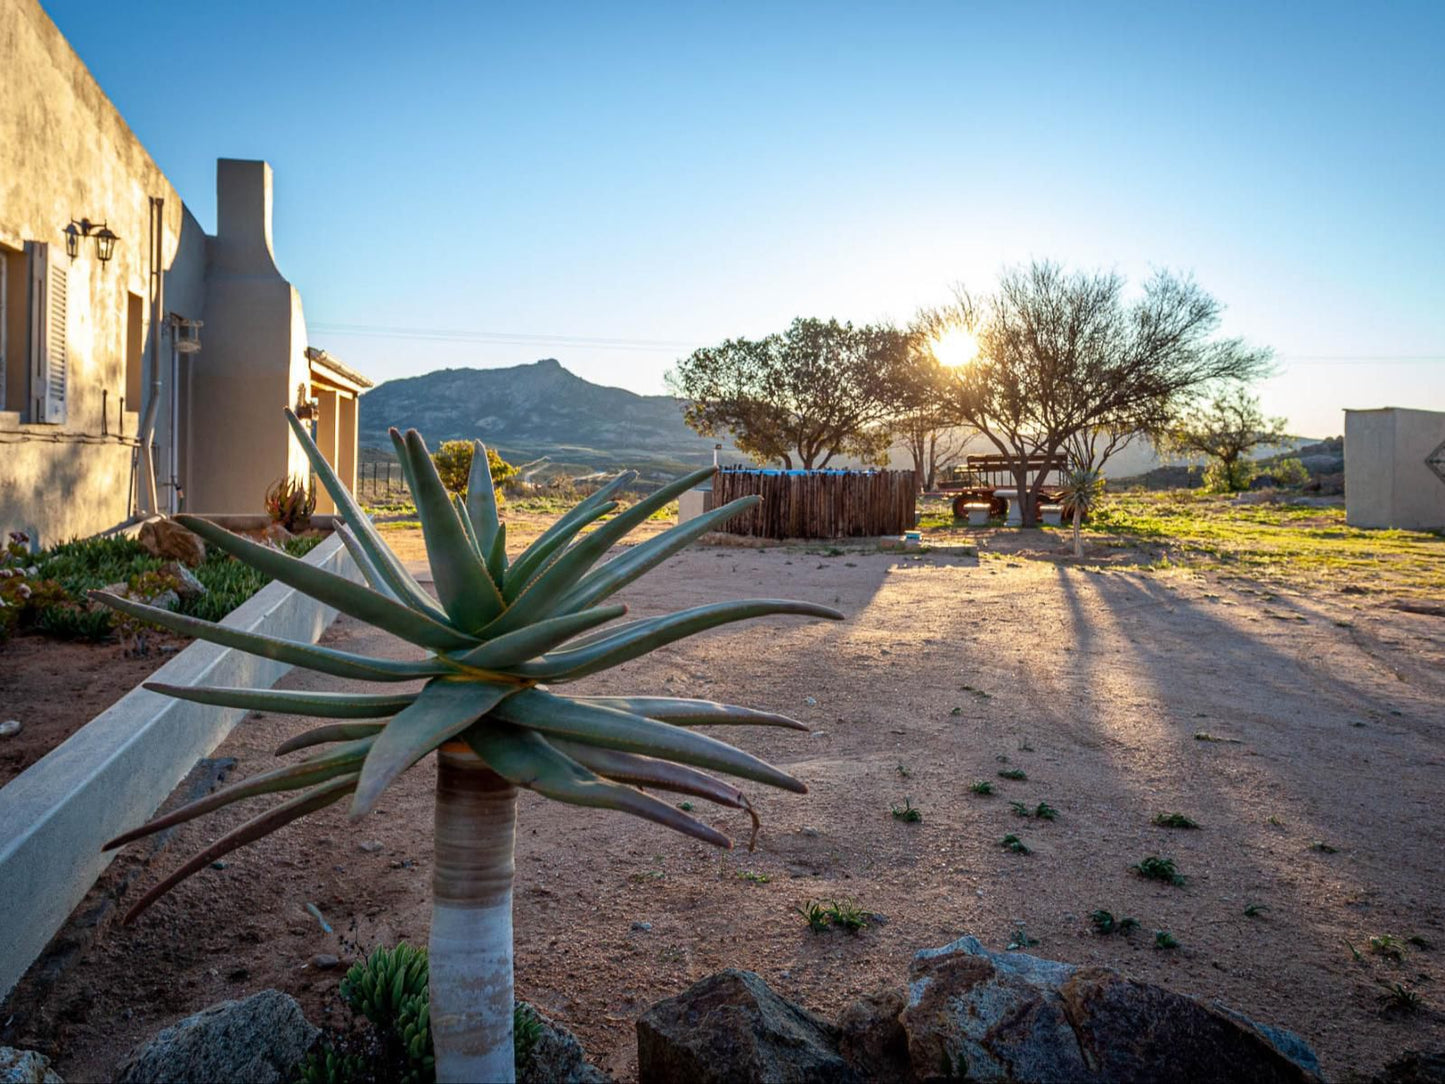 Kamieskroon Cosy Cottages Kamieskroon Northern Cape South Africa Cactus, Plant, Nature, Desert, Sand, Framing